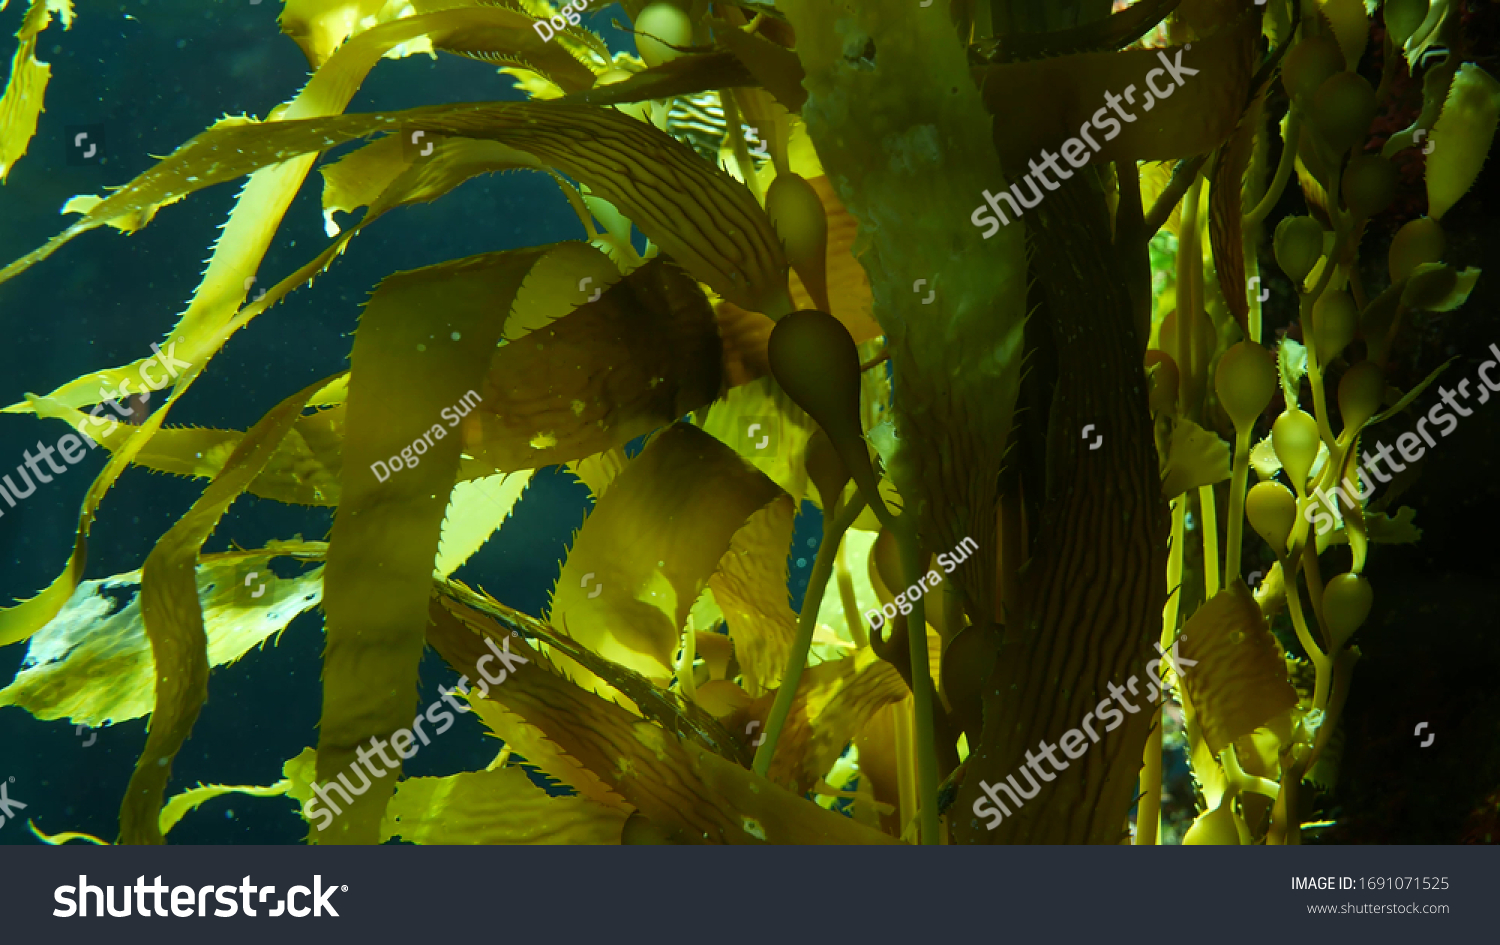 Light rays filter through a Giant Kelp forest. Macrocystis pyrifera. Diving, Aquarium and Marine concept. Underwater close up of swaying Seaweed leaves. Sunlight pierces vibrant exotic Ocean plants. #1691071525